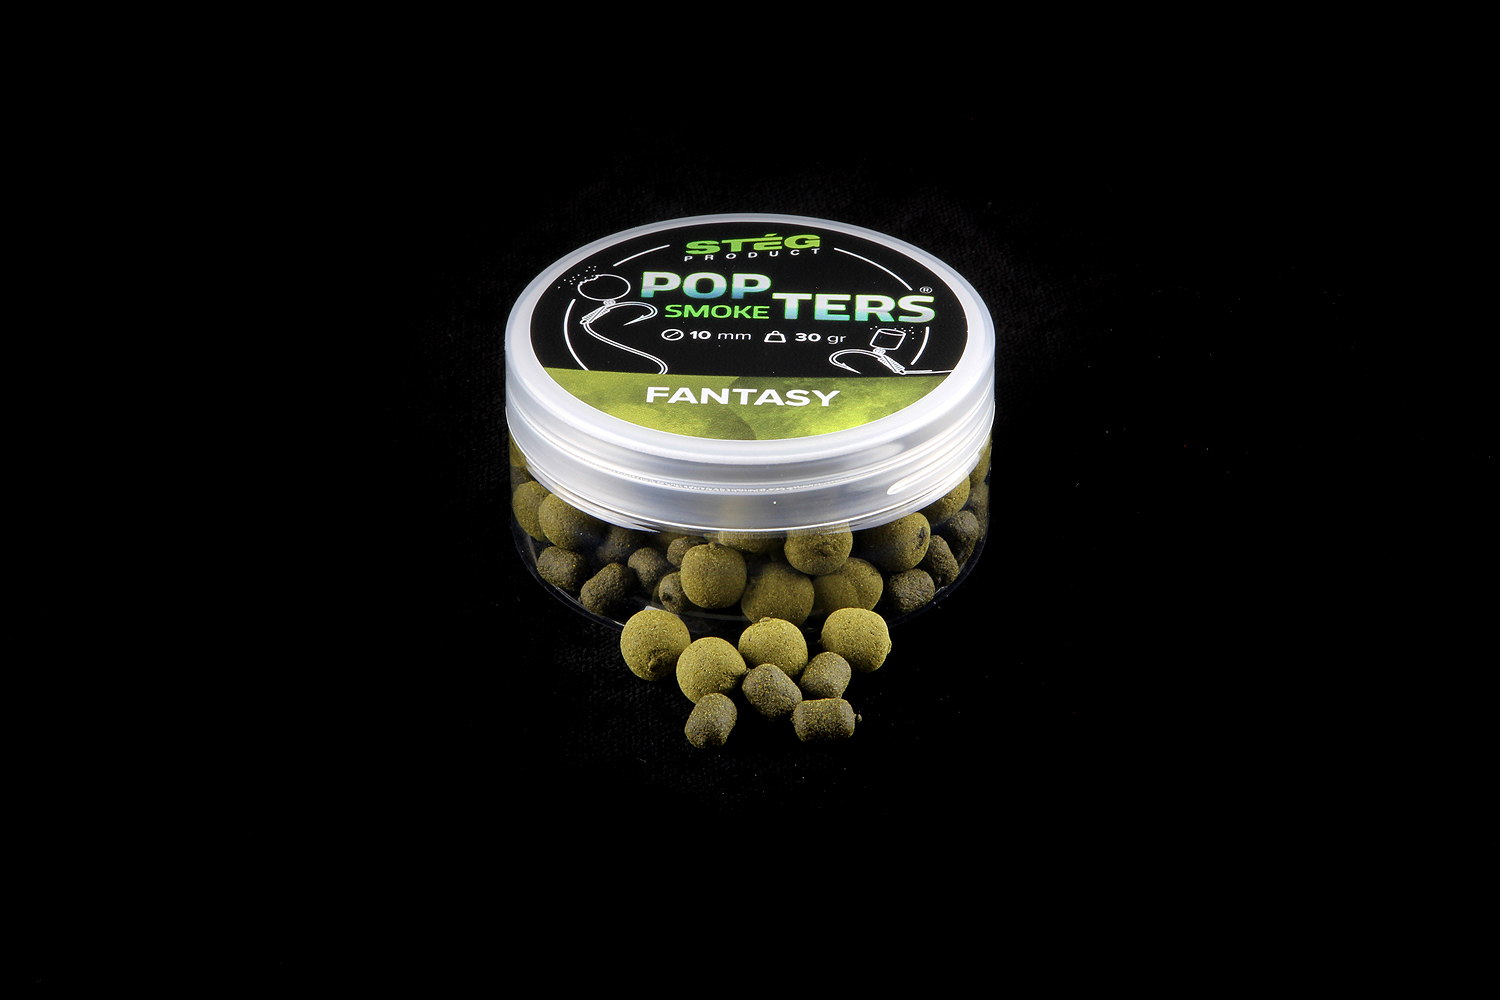 STÉG PRODUCT POPTERS SMOKE BALL 10mm FANTASY 30gr